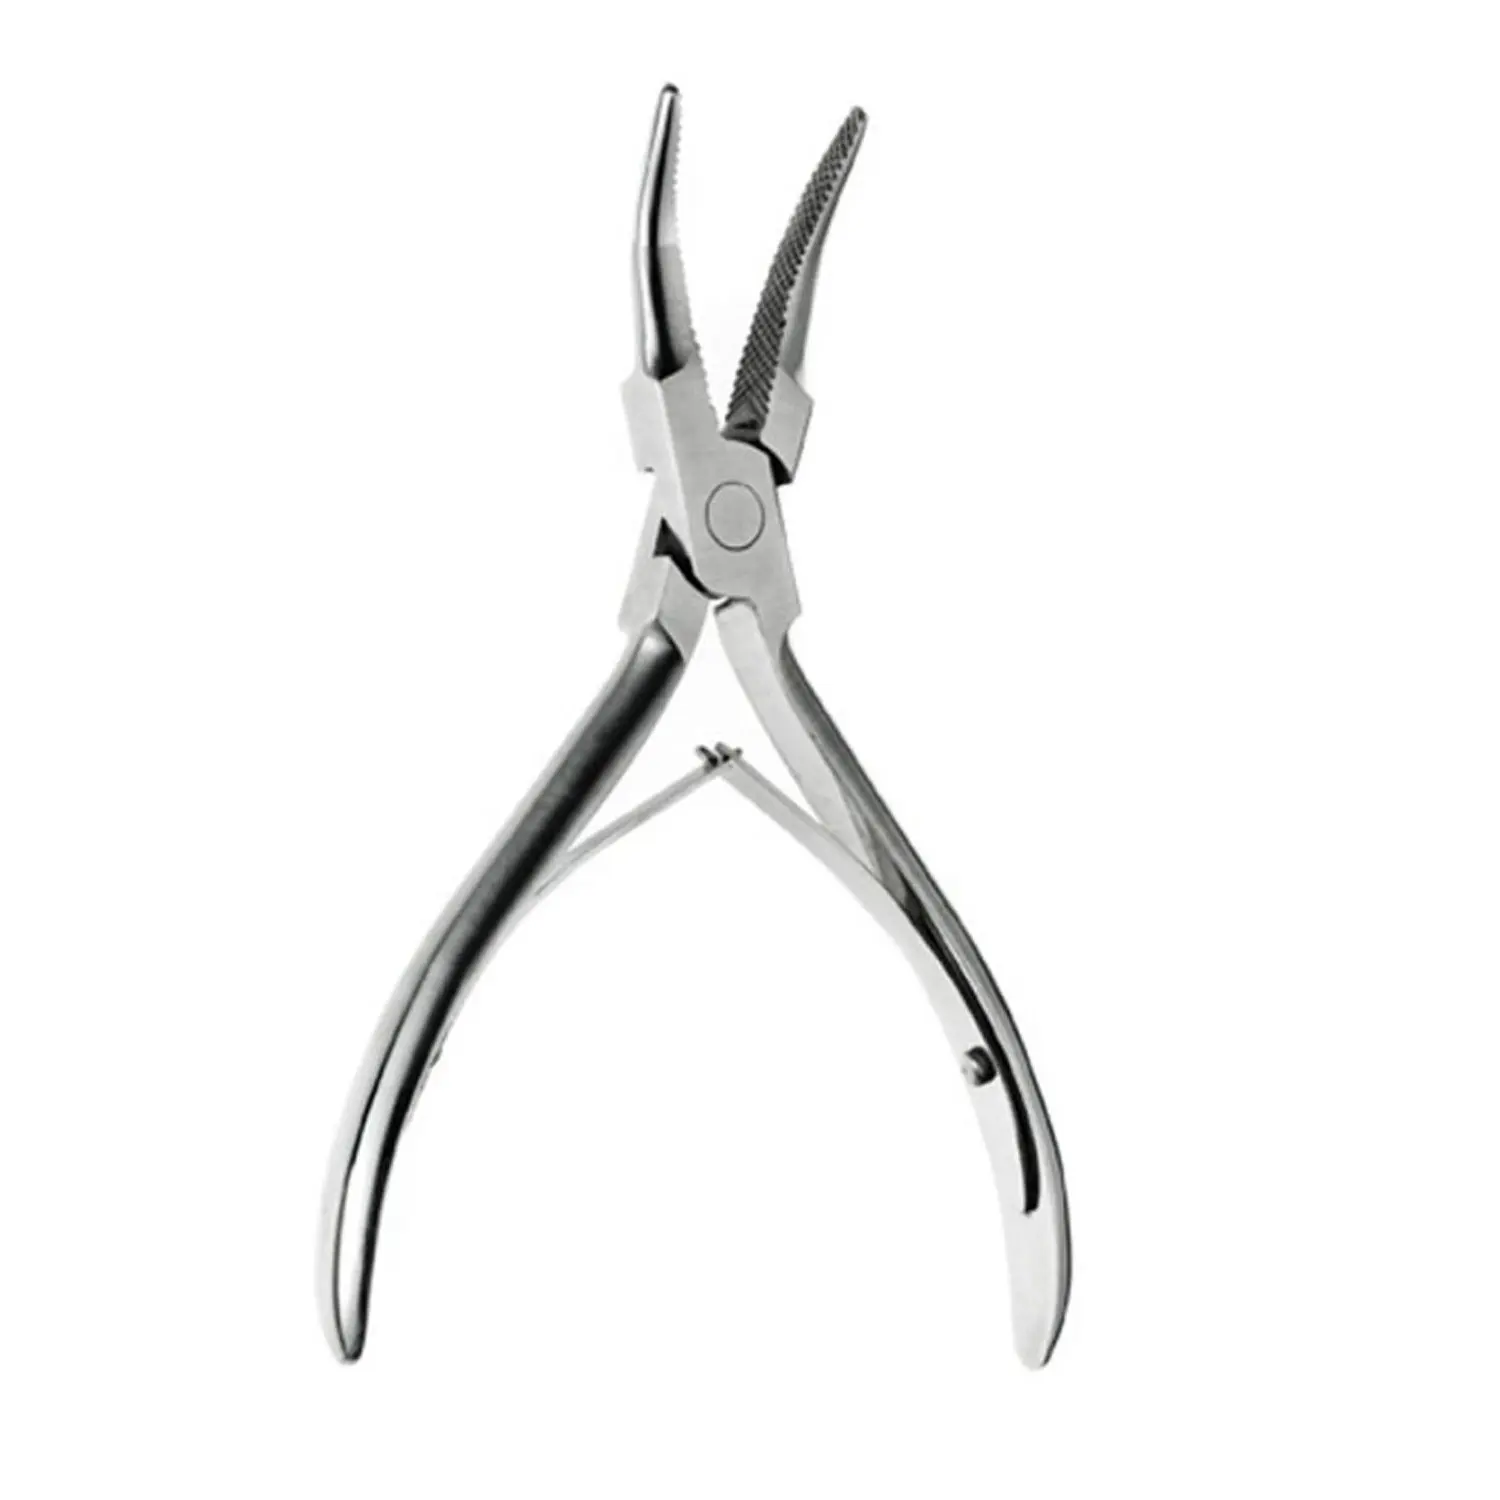 Top quality Curved Fish Bone Pliers high stainless steel pliers manufactured by Tweezer World